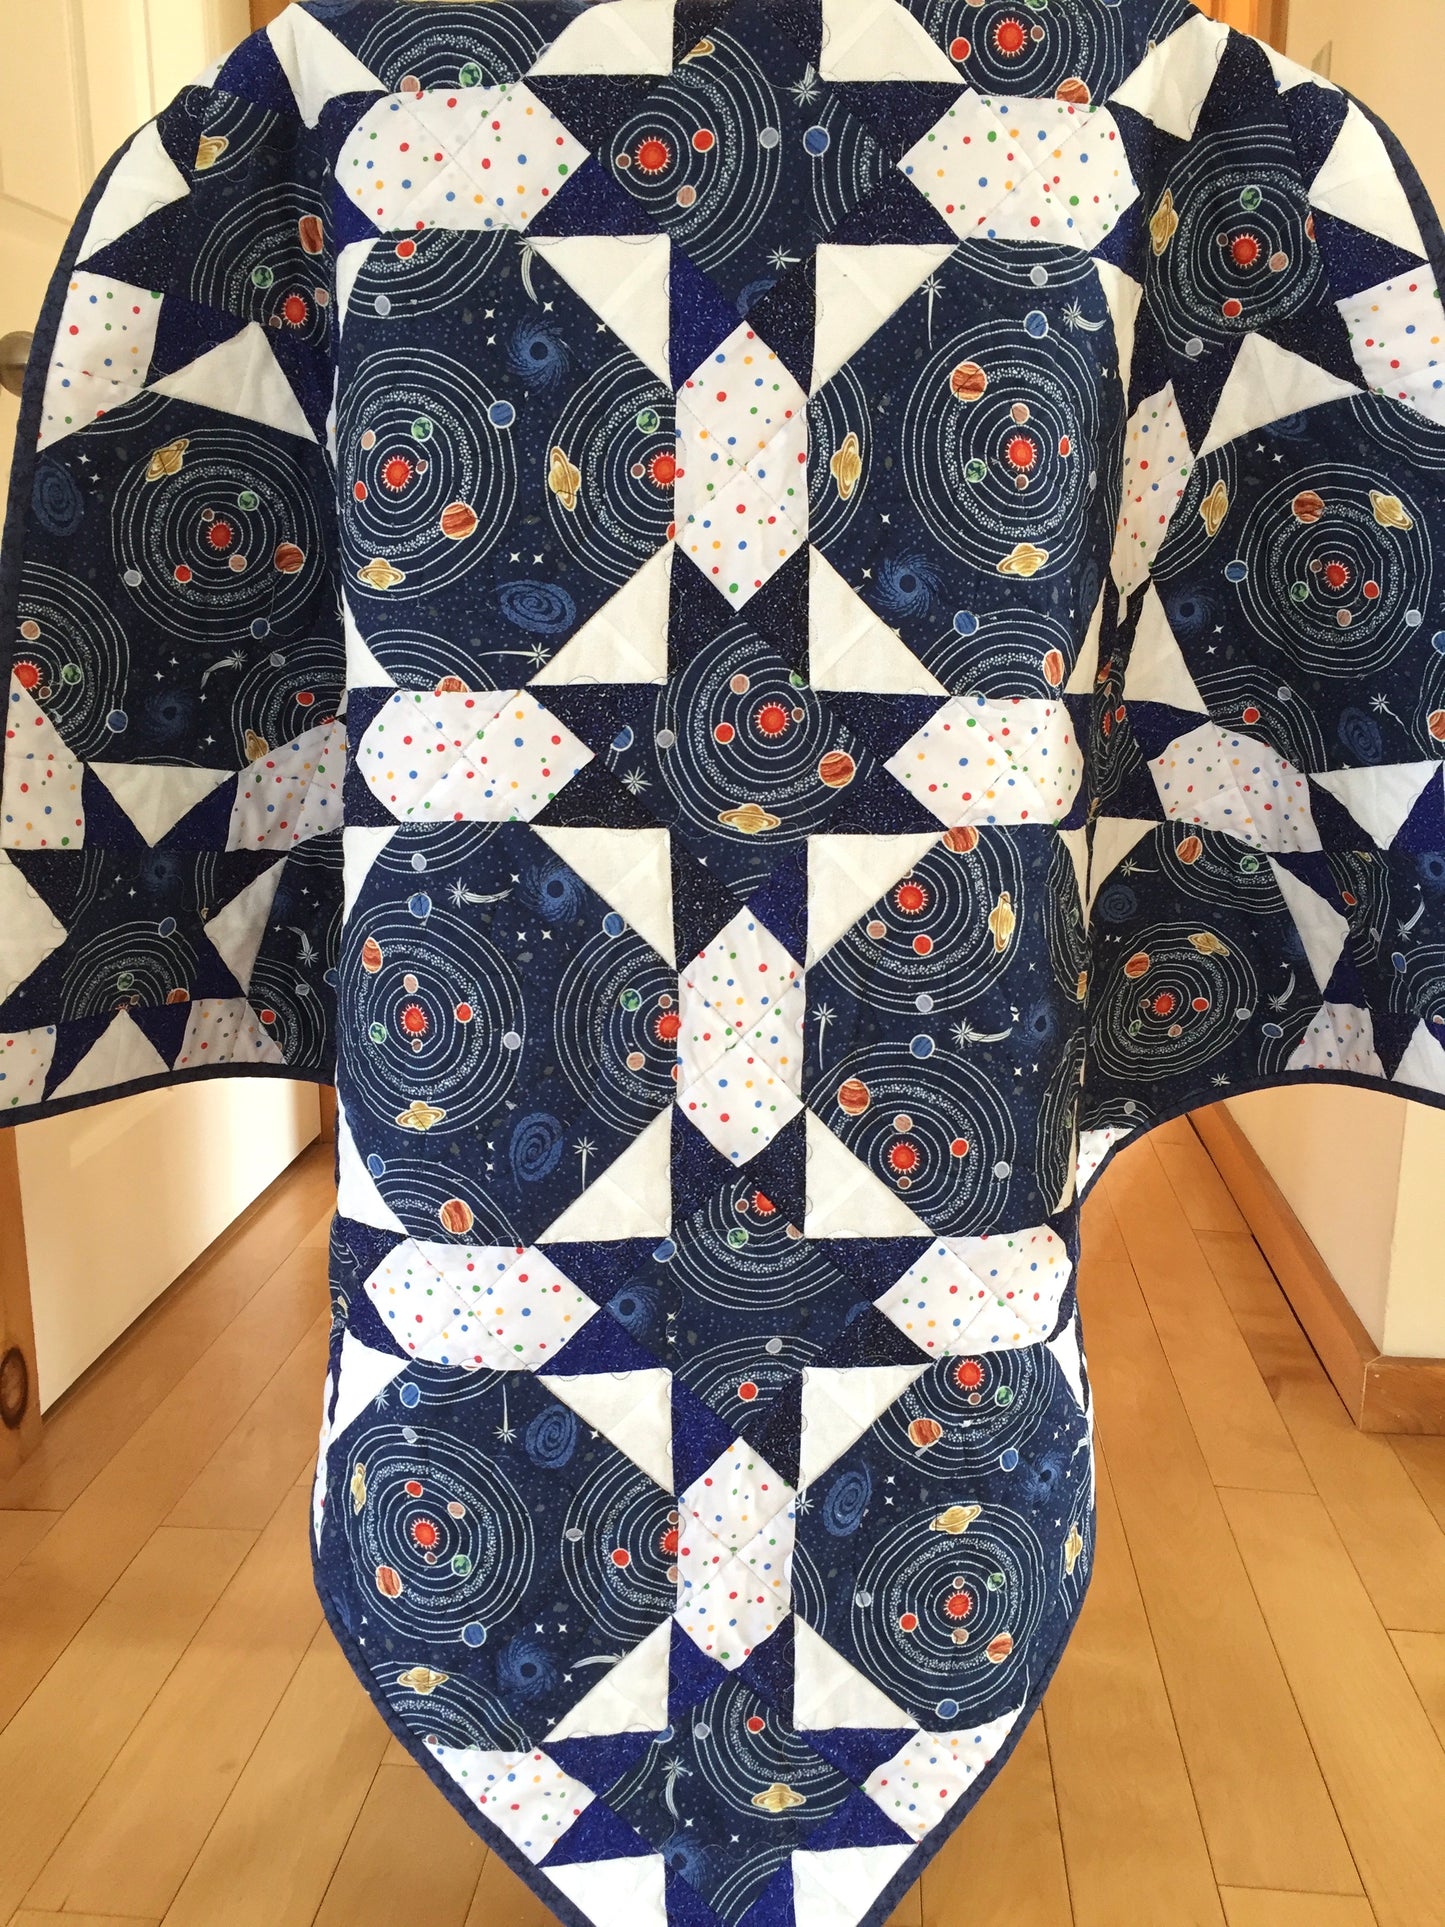 Light Years Quilt